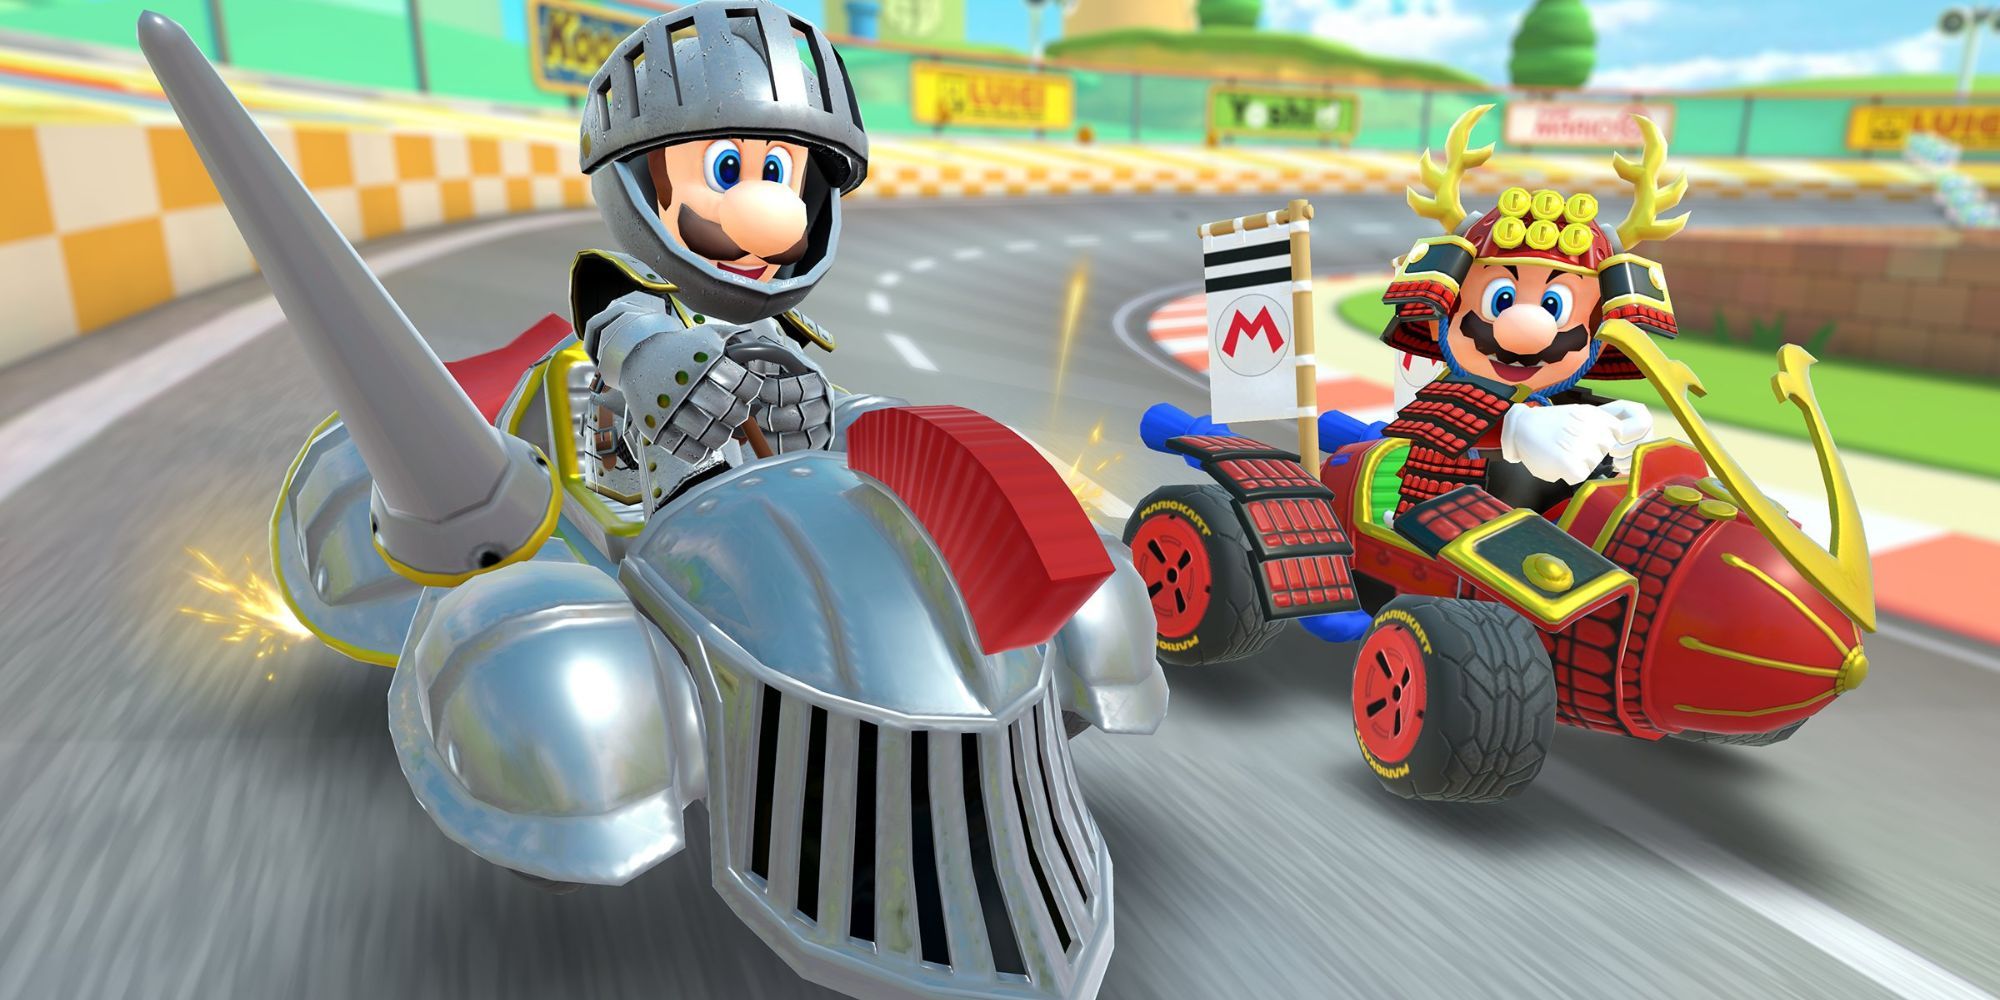 Mario and Luigi drive beside each other dressed as a samurai and knight